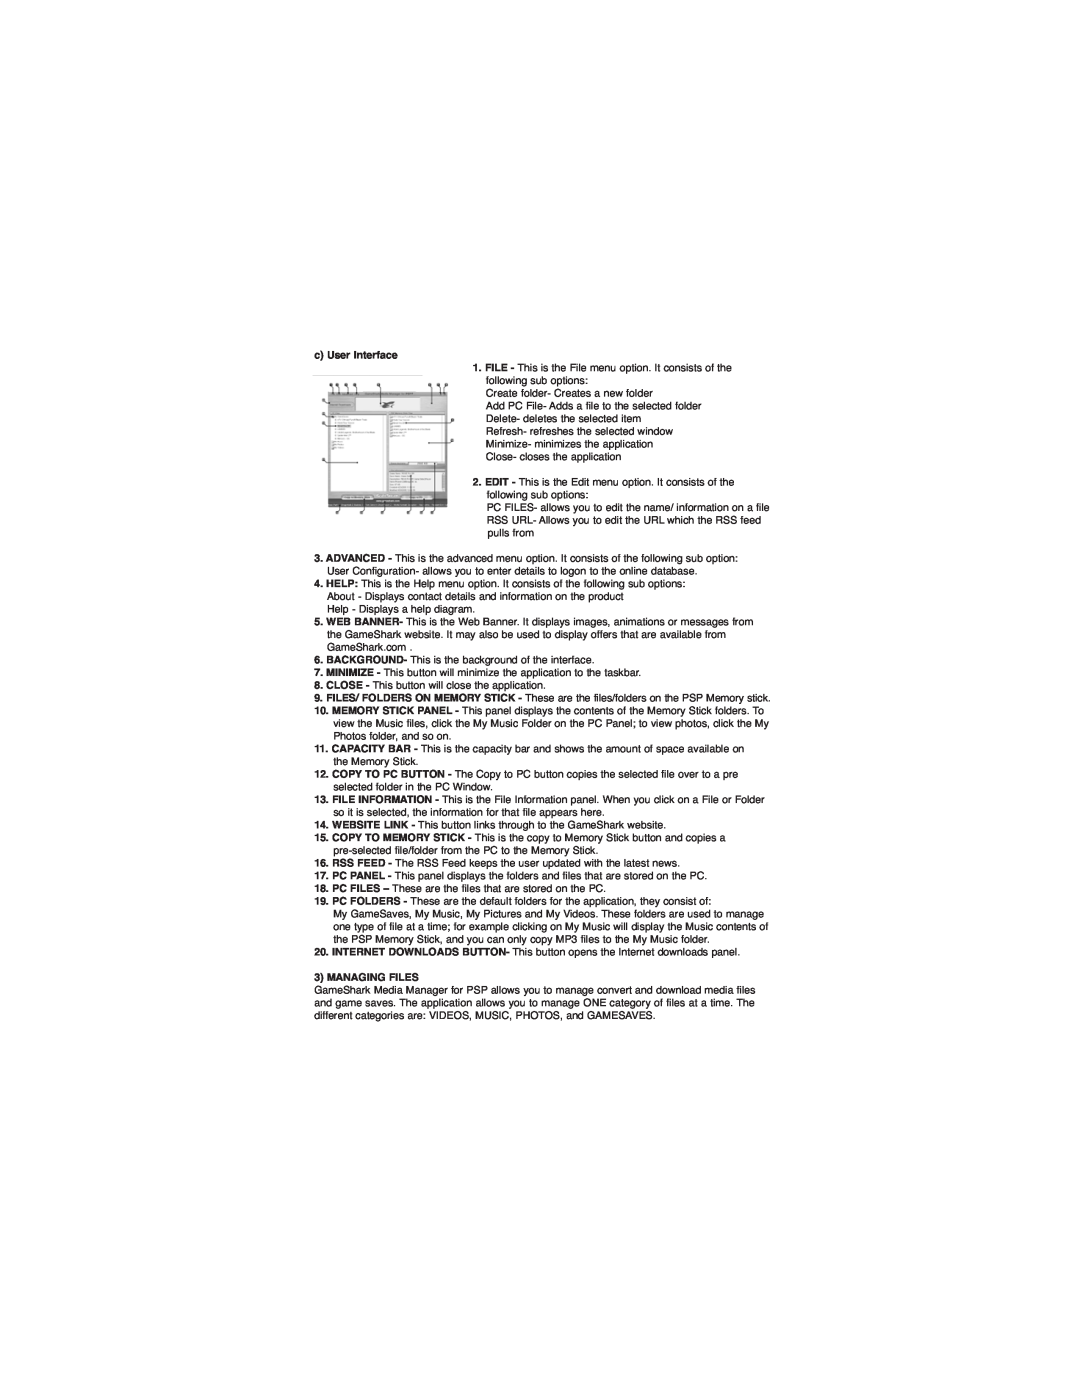 Apple Media Manager for PSP instruction manual c User Interface, Managing Files 